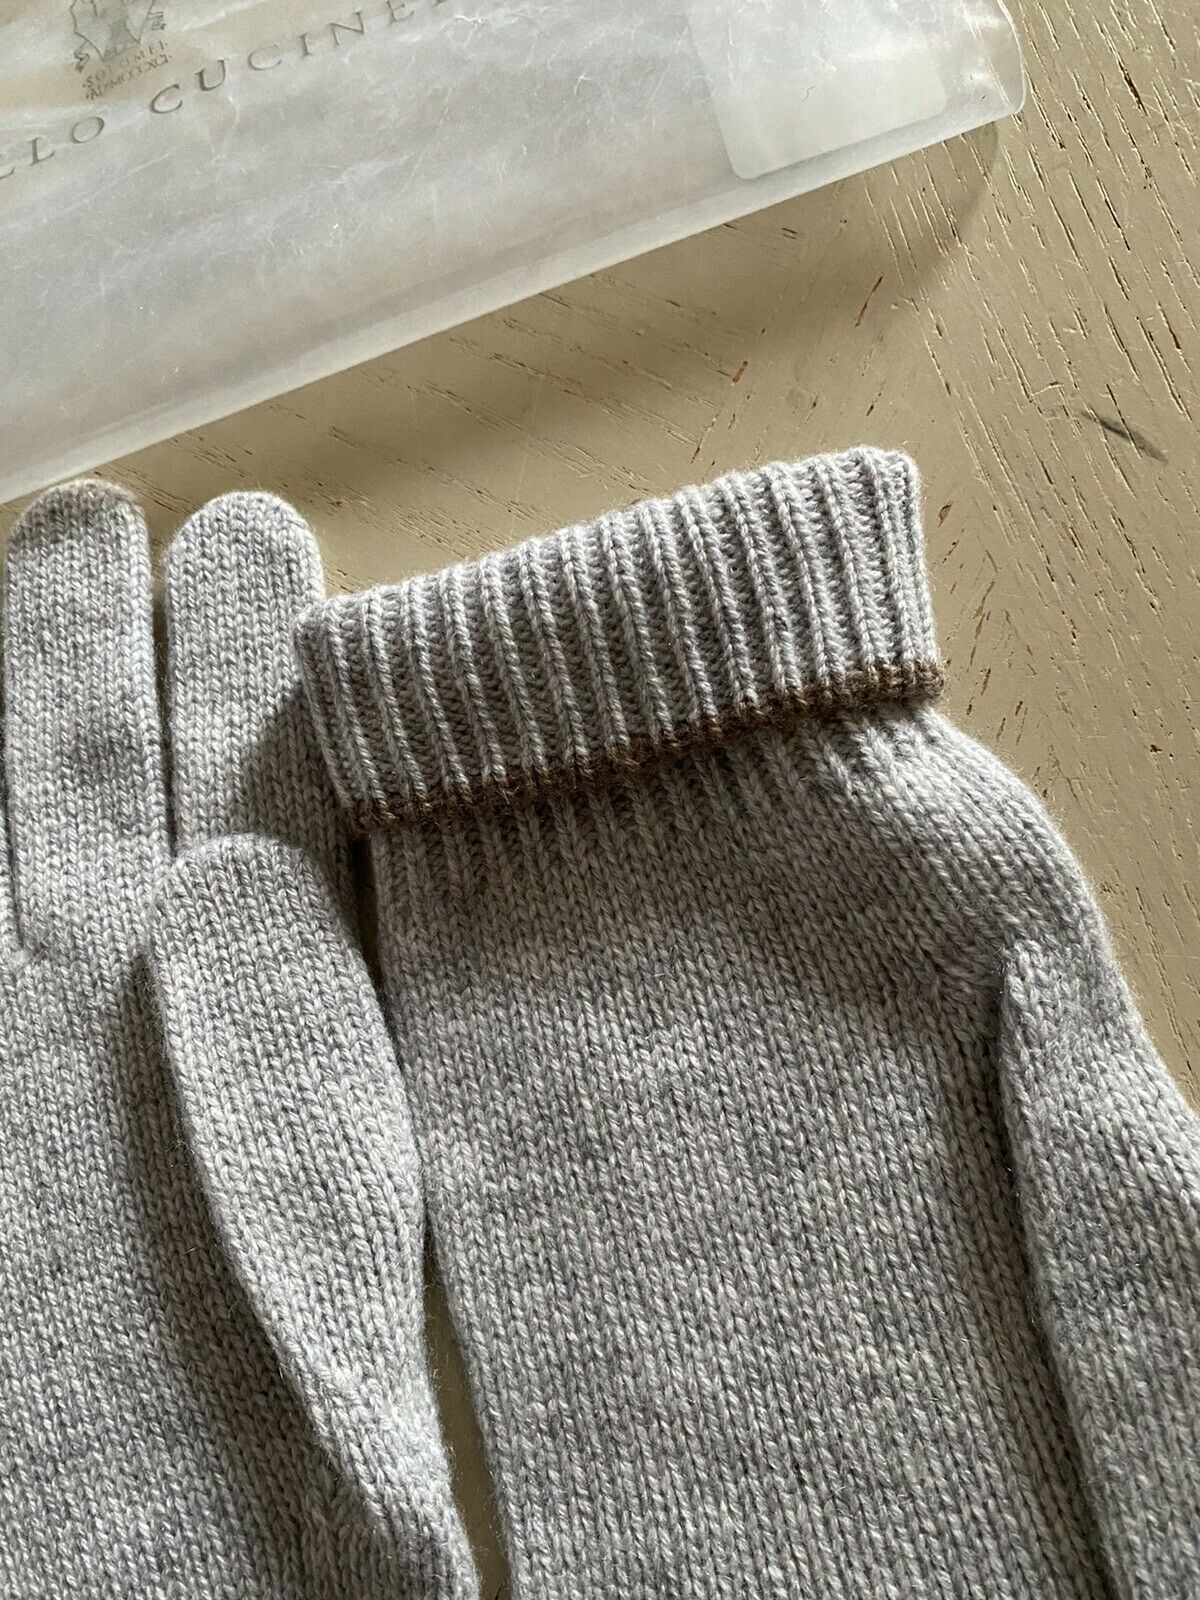 NWT $555 Brunello Cucinelli Women Ribbed Cashmere Gloves Gray Size L Italy